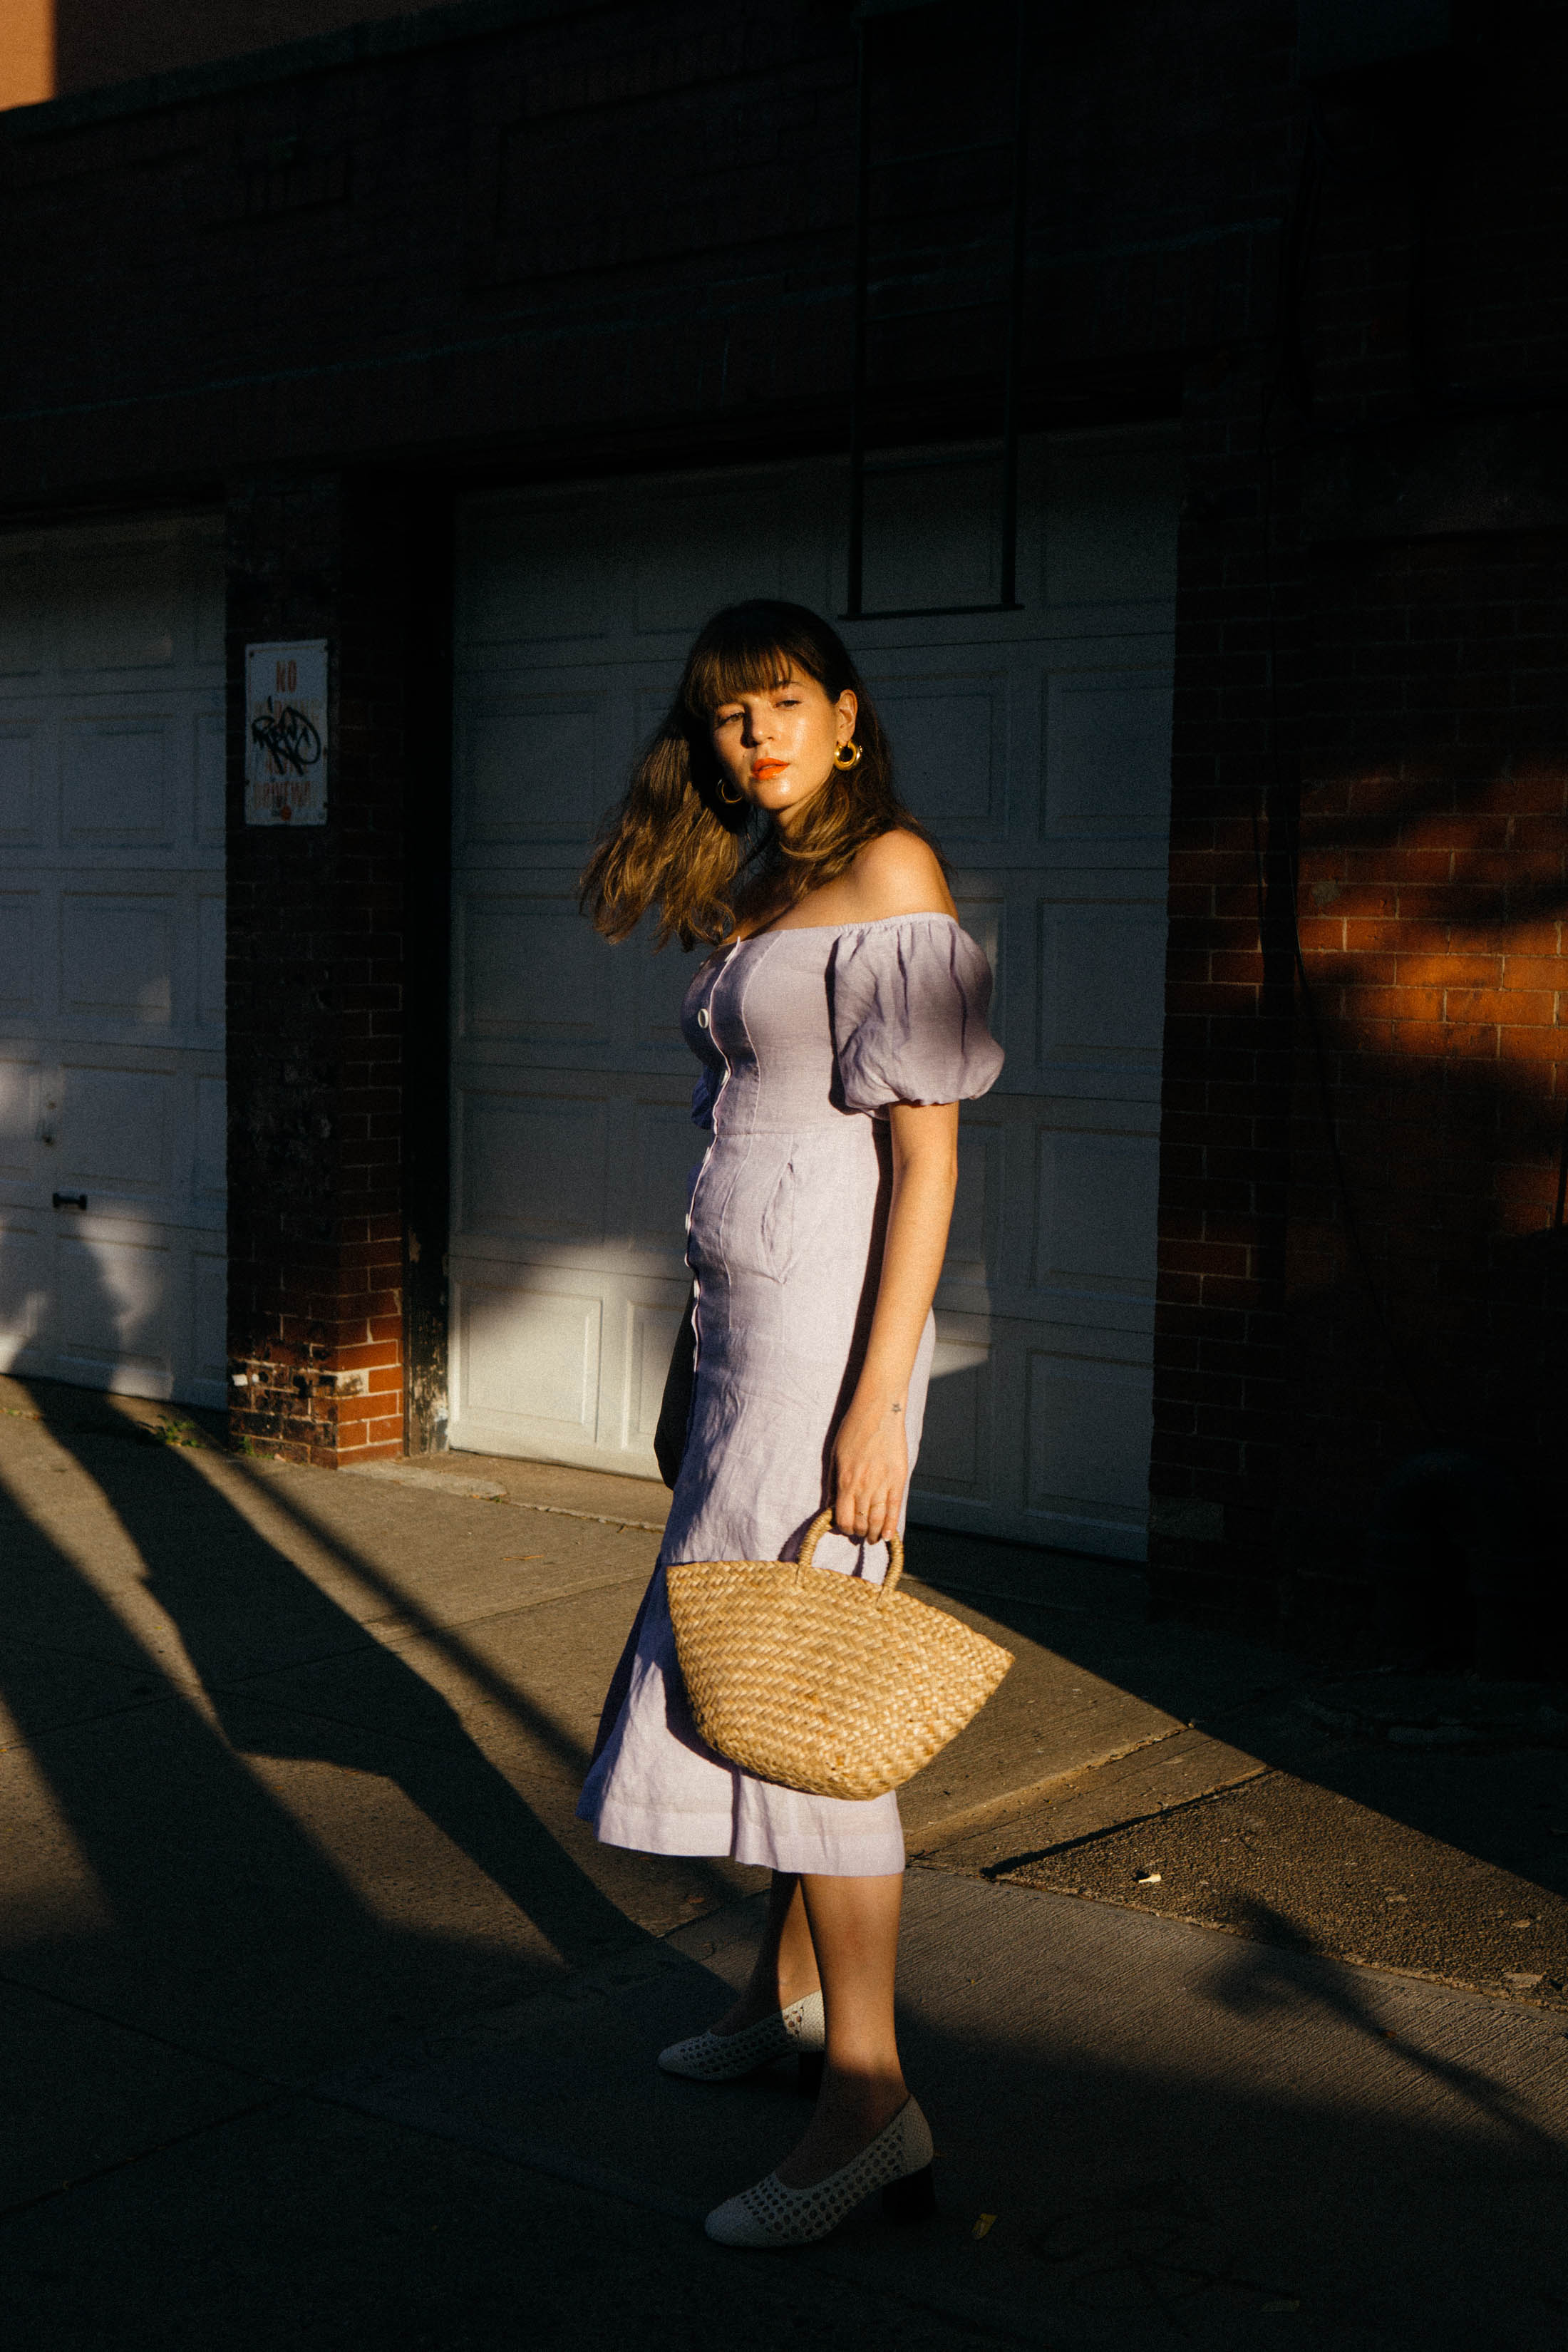 Maristella wears a lilac linen off the shoulder dress from Kitri Studio